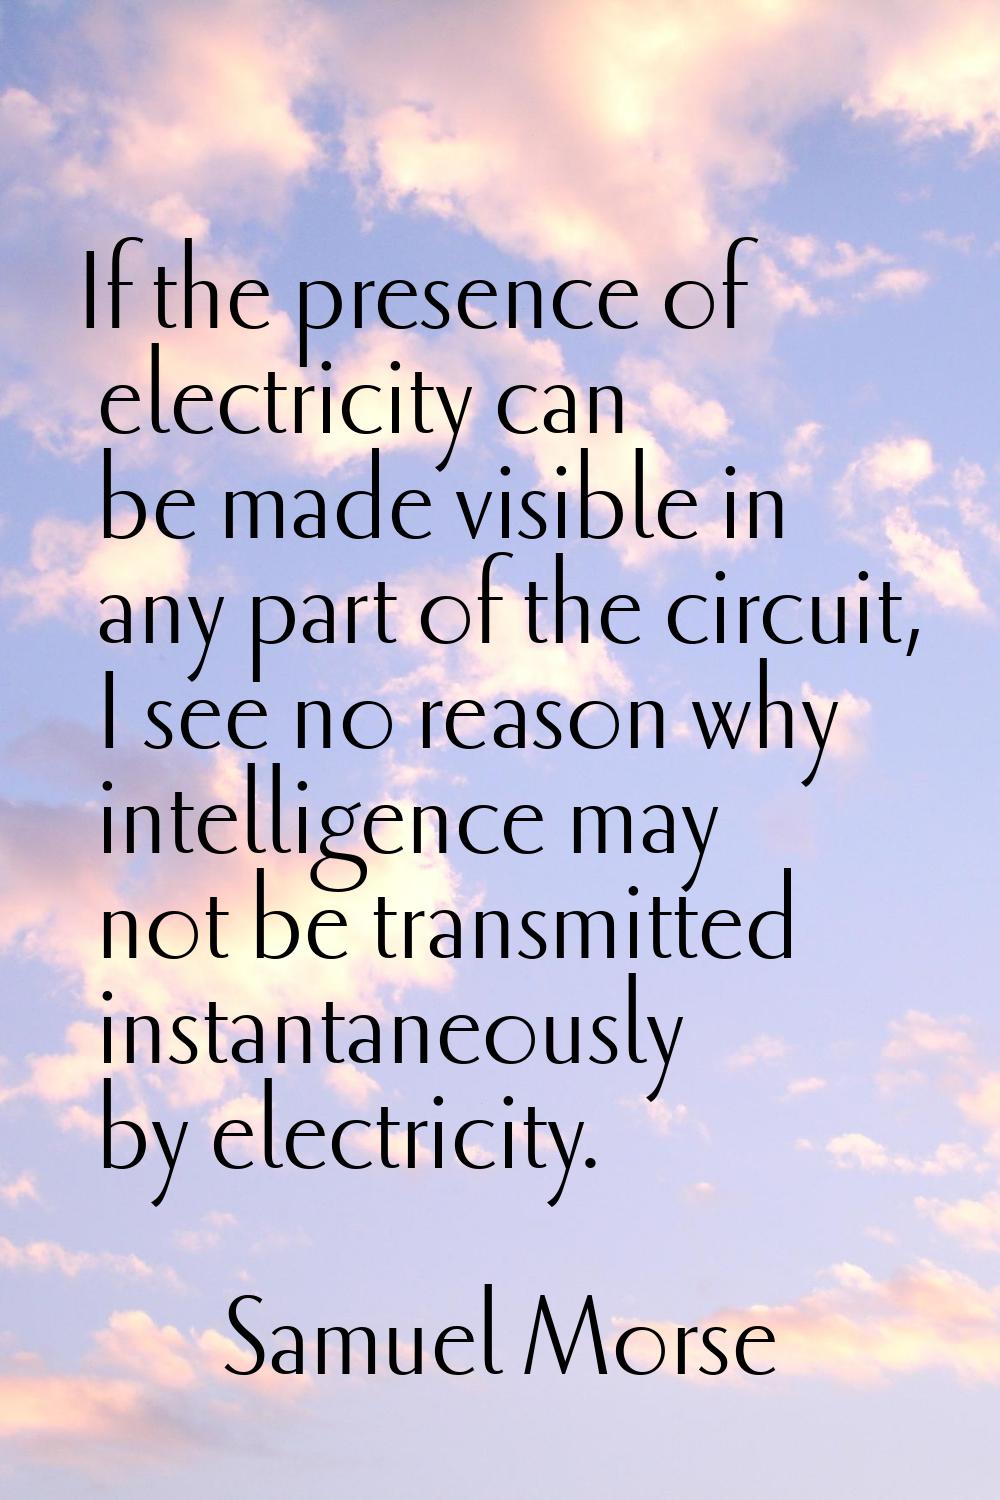 If the presence of electricity can be made visible in any part of the circuit, I see no reason why 